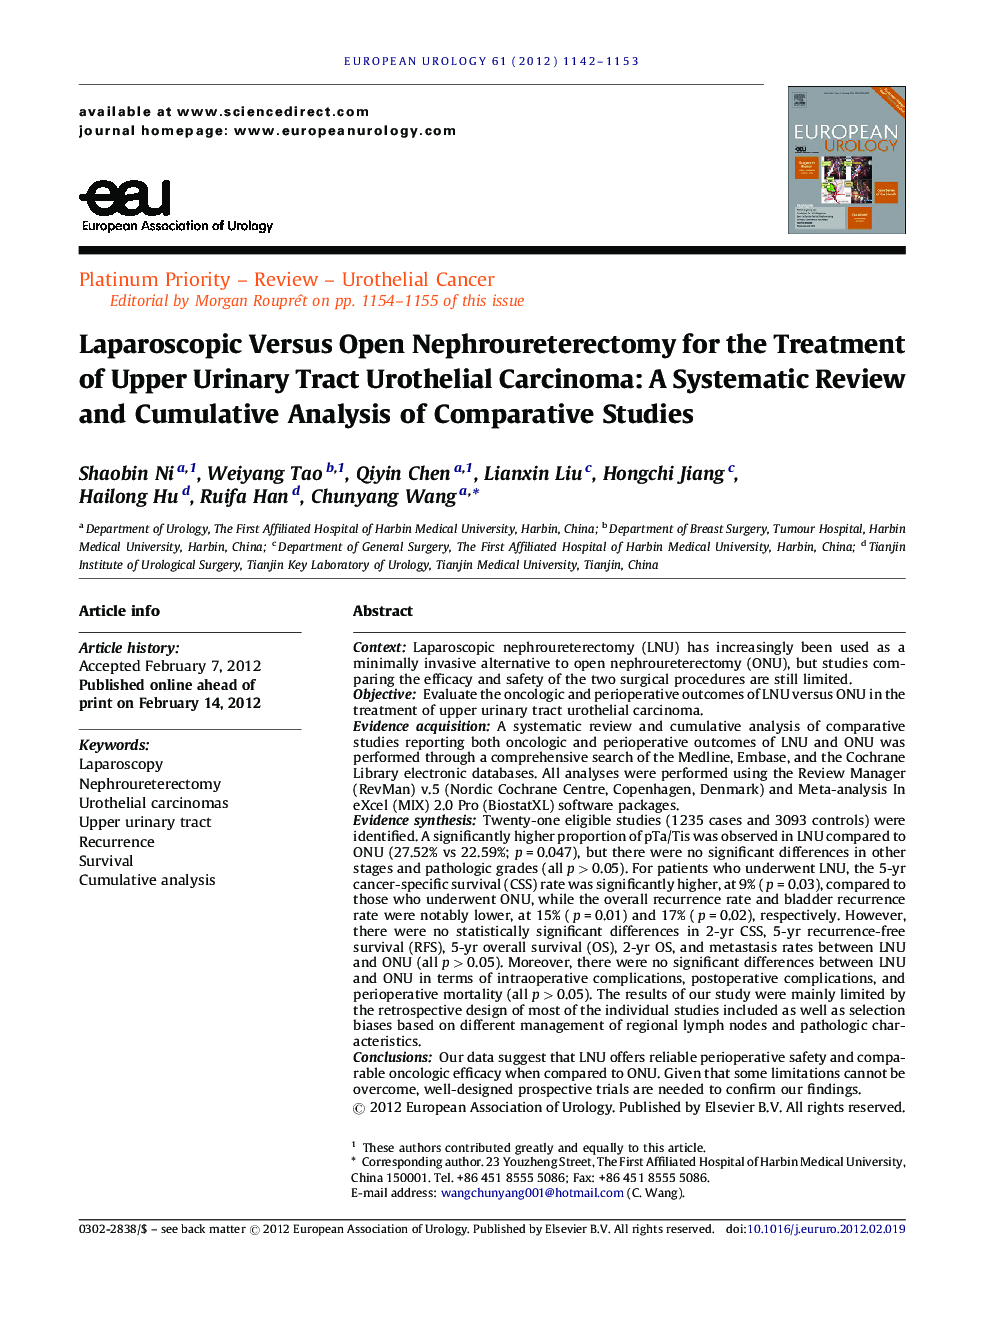 Laparoscopic Versus Open Nephroureterectomy for the Treatment of Upper Urinary Tract Urothelial Carcinoma: A Systematic Review and Cumulative Analysis of Comparative Studies